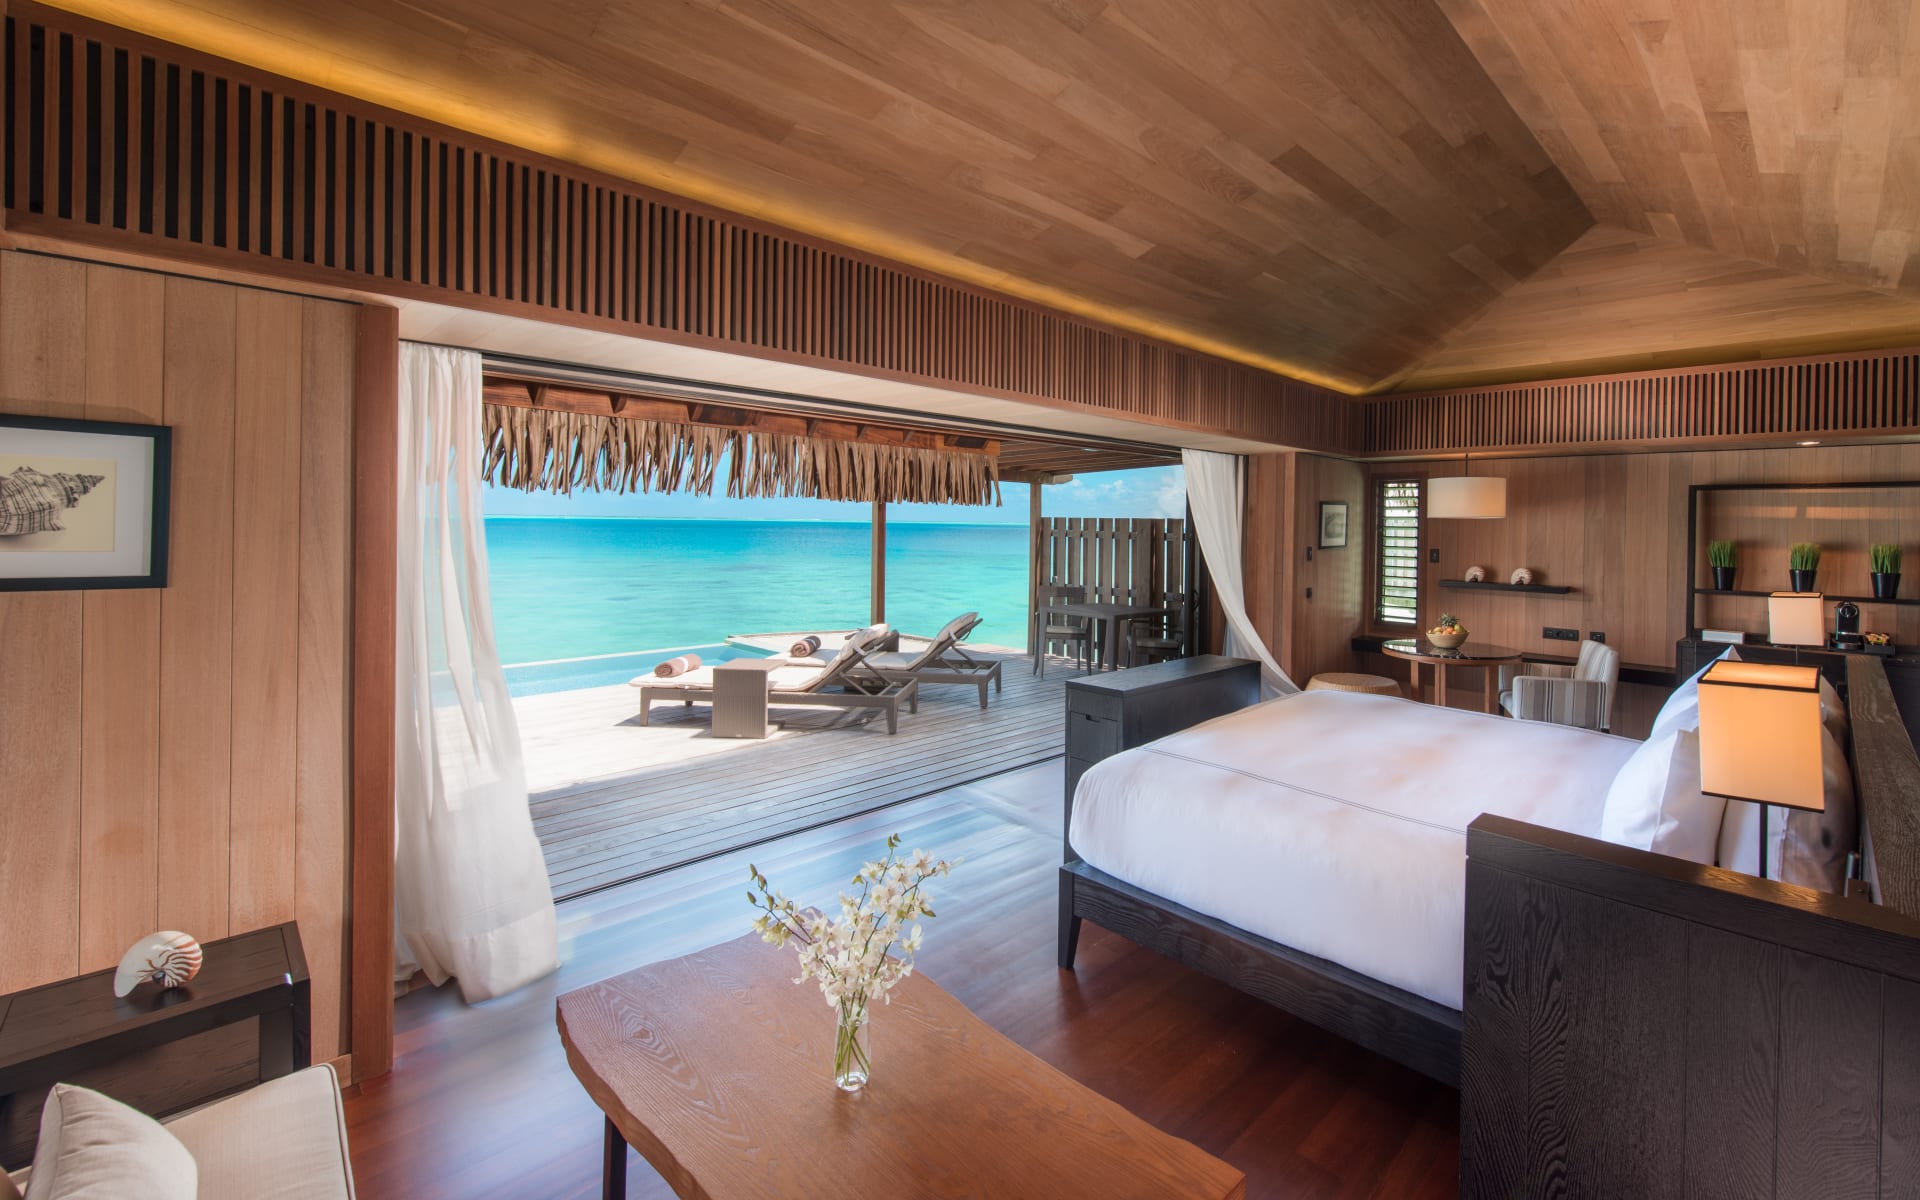 A bedroom has an open-plan design, with the room opening up to the beach. 